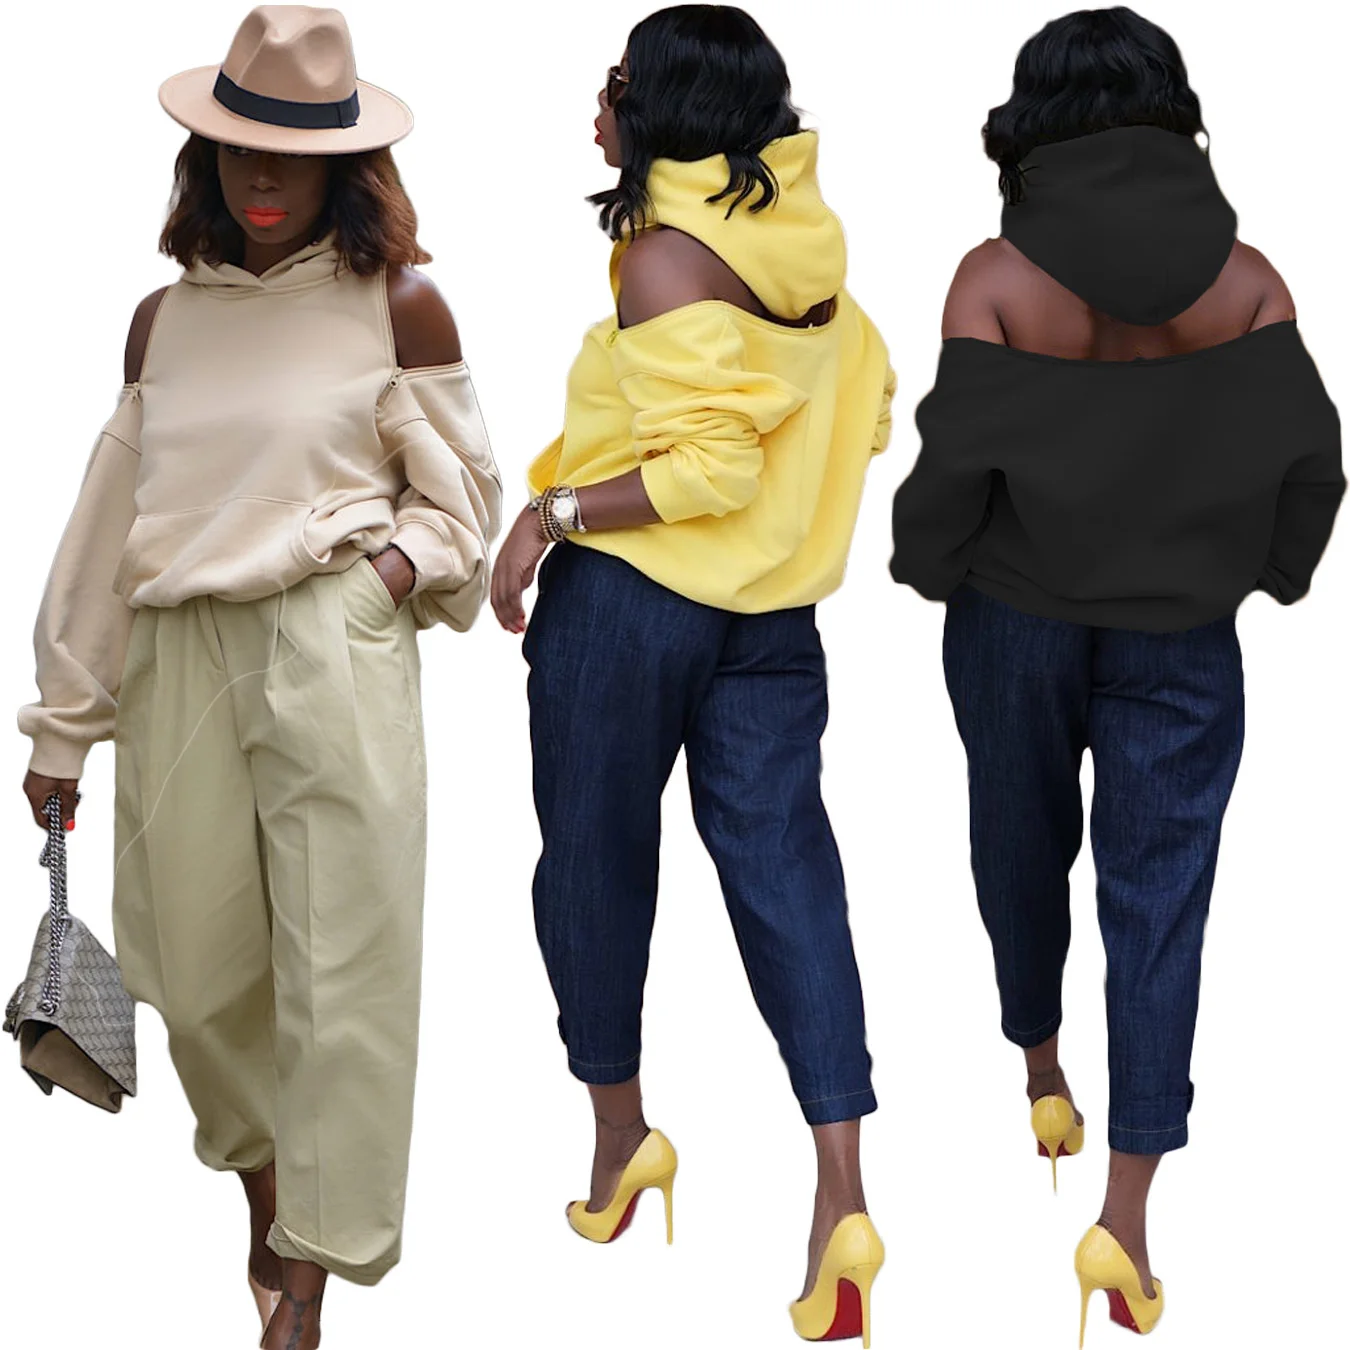 Women Designer in 3 Colors Fashion Oversized Sweatshirt Hollow Out Hoodie for Femme Spring Autumn Clothing